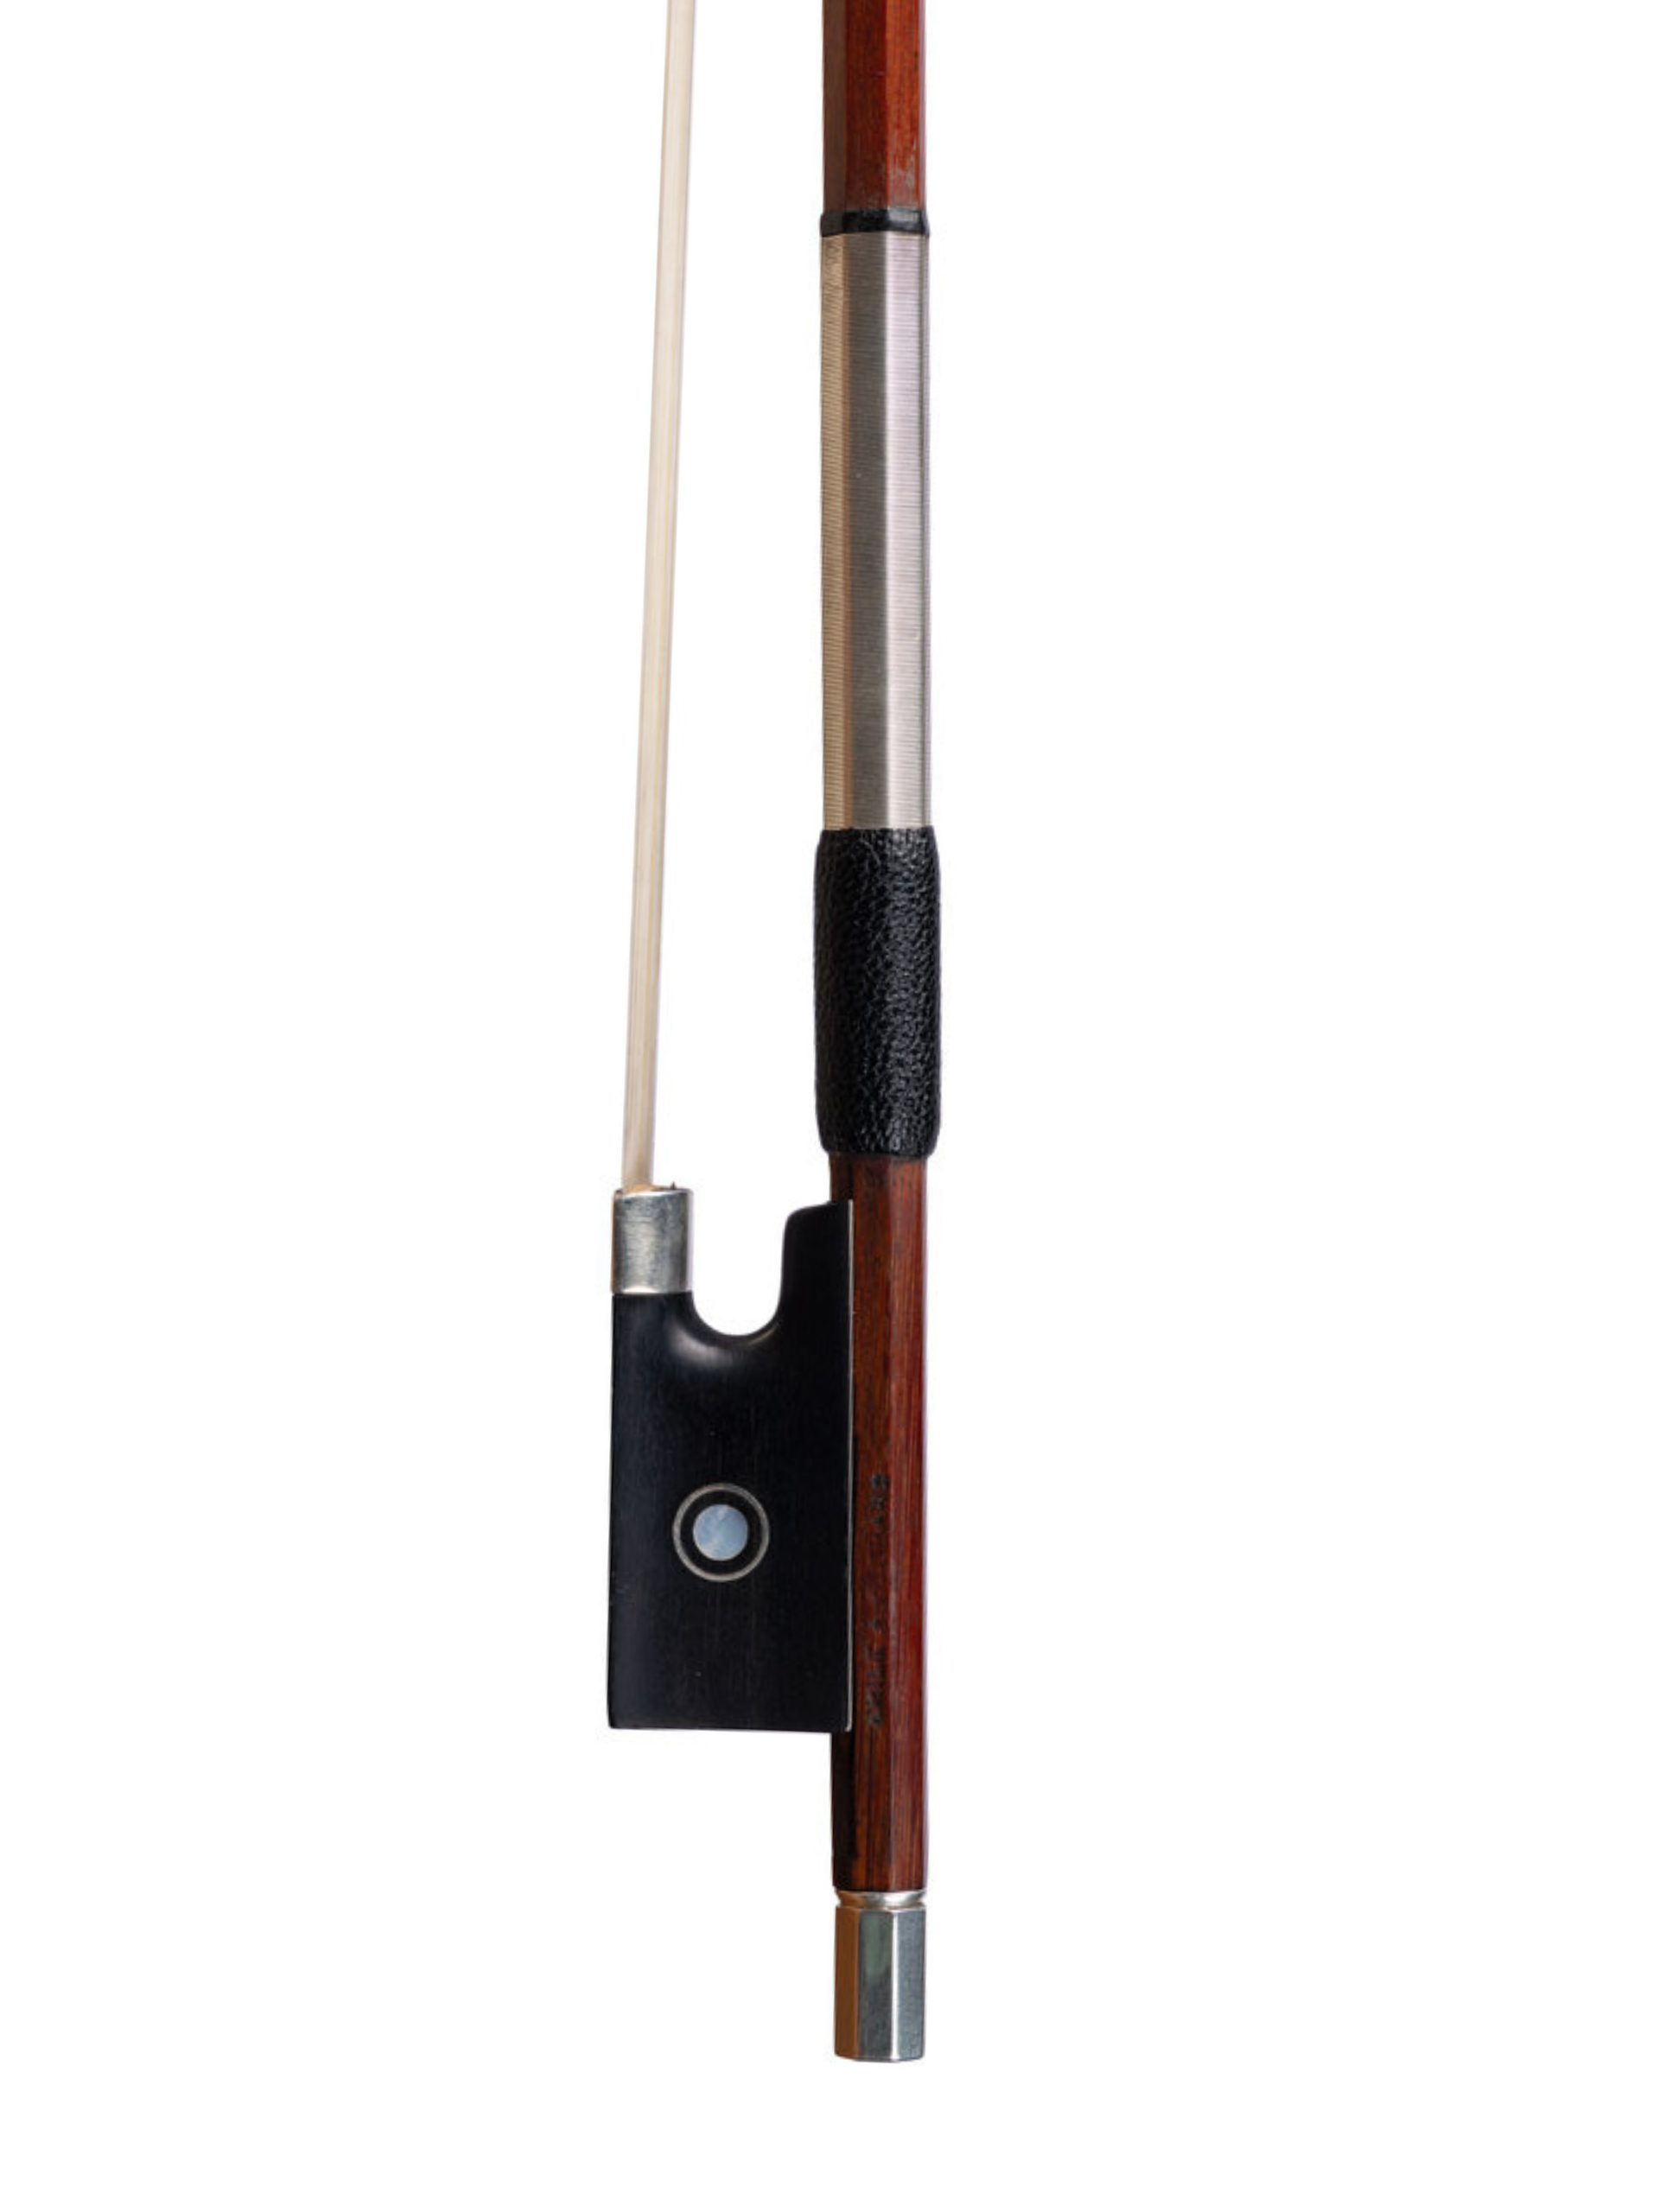 Ouchard violin bow